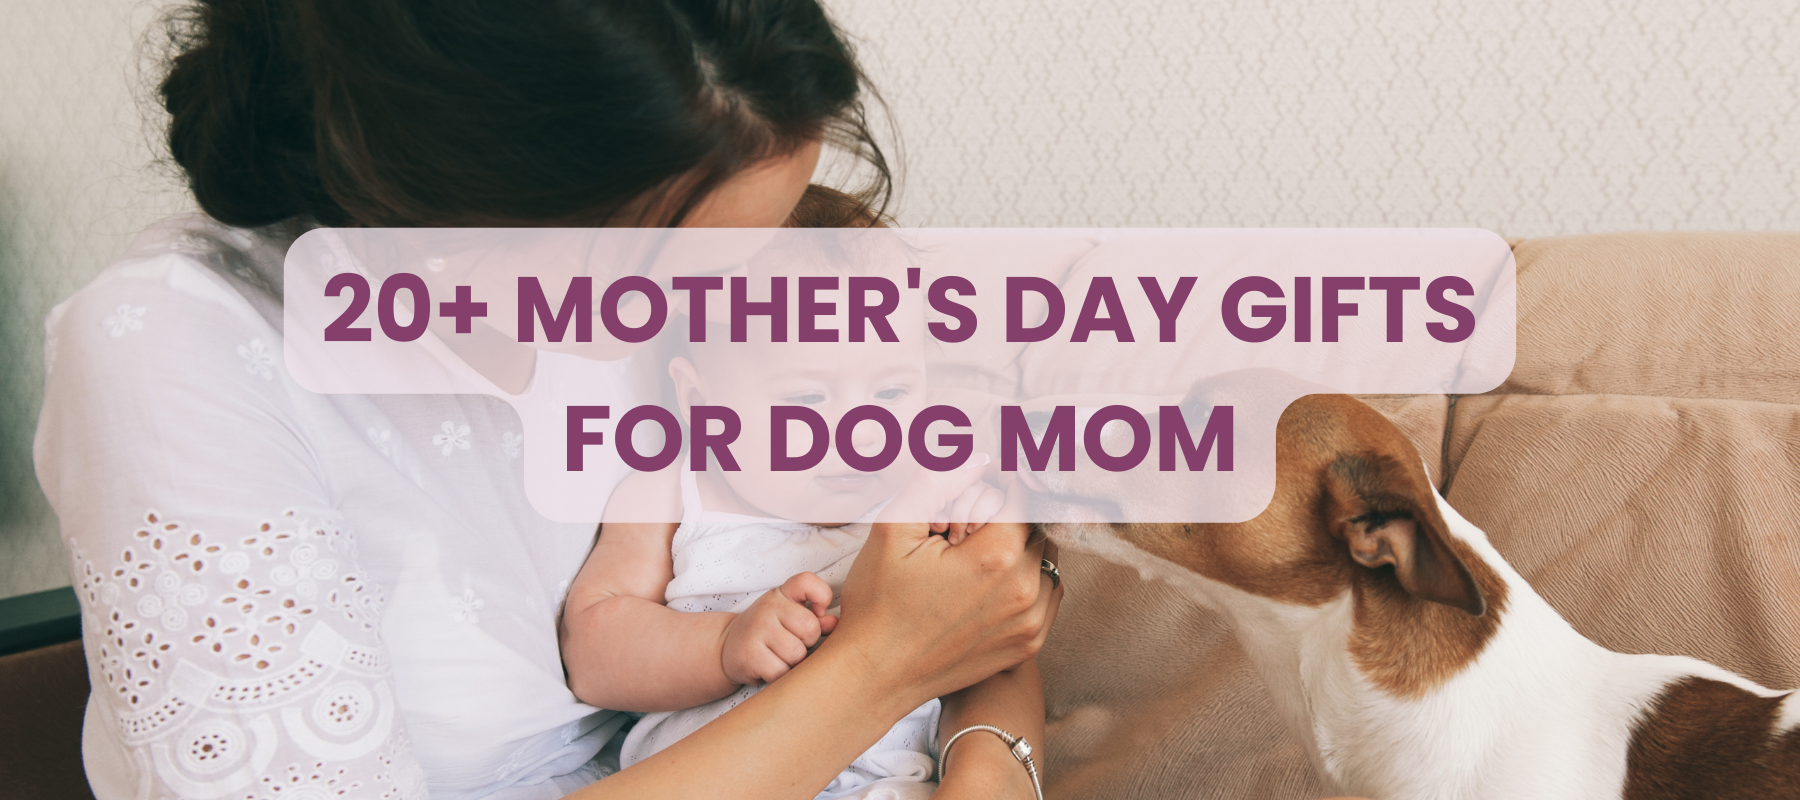 Mother's day gifts for dog mom